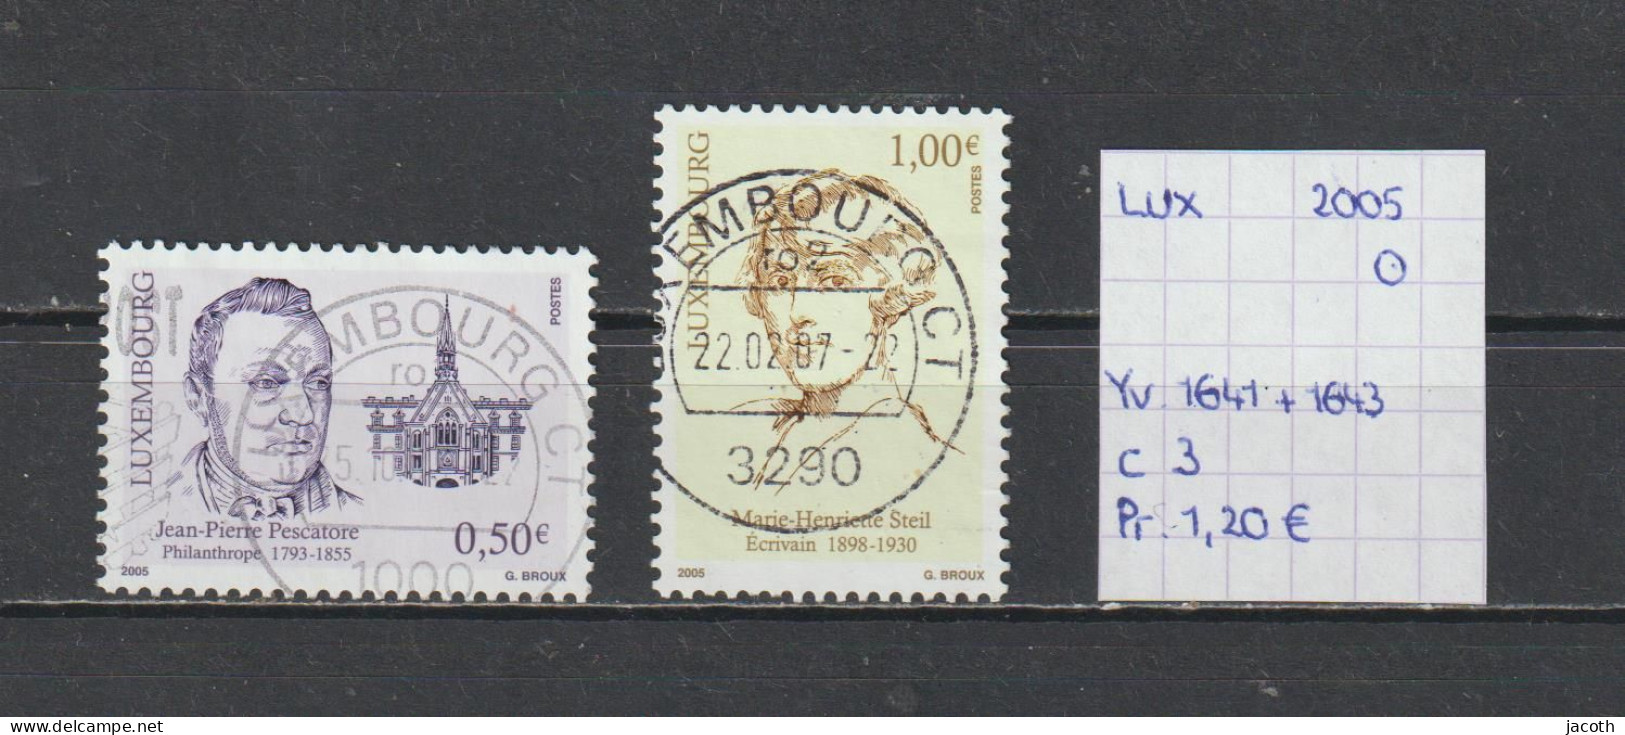 (TJ) Luxembourg 2005 - YT 1641 + 1643 (gest./obl./used) - Gebraucht